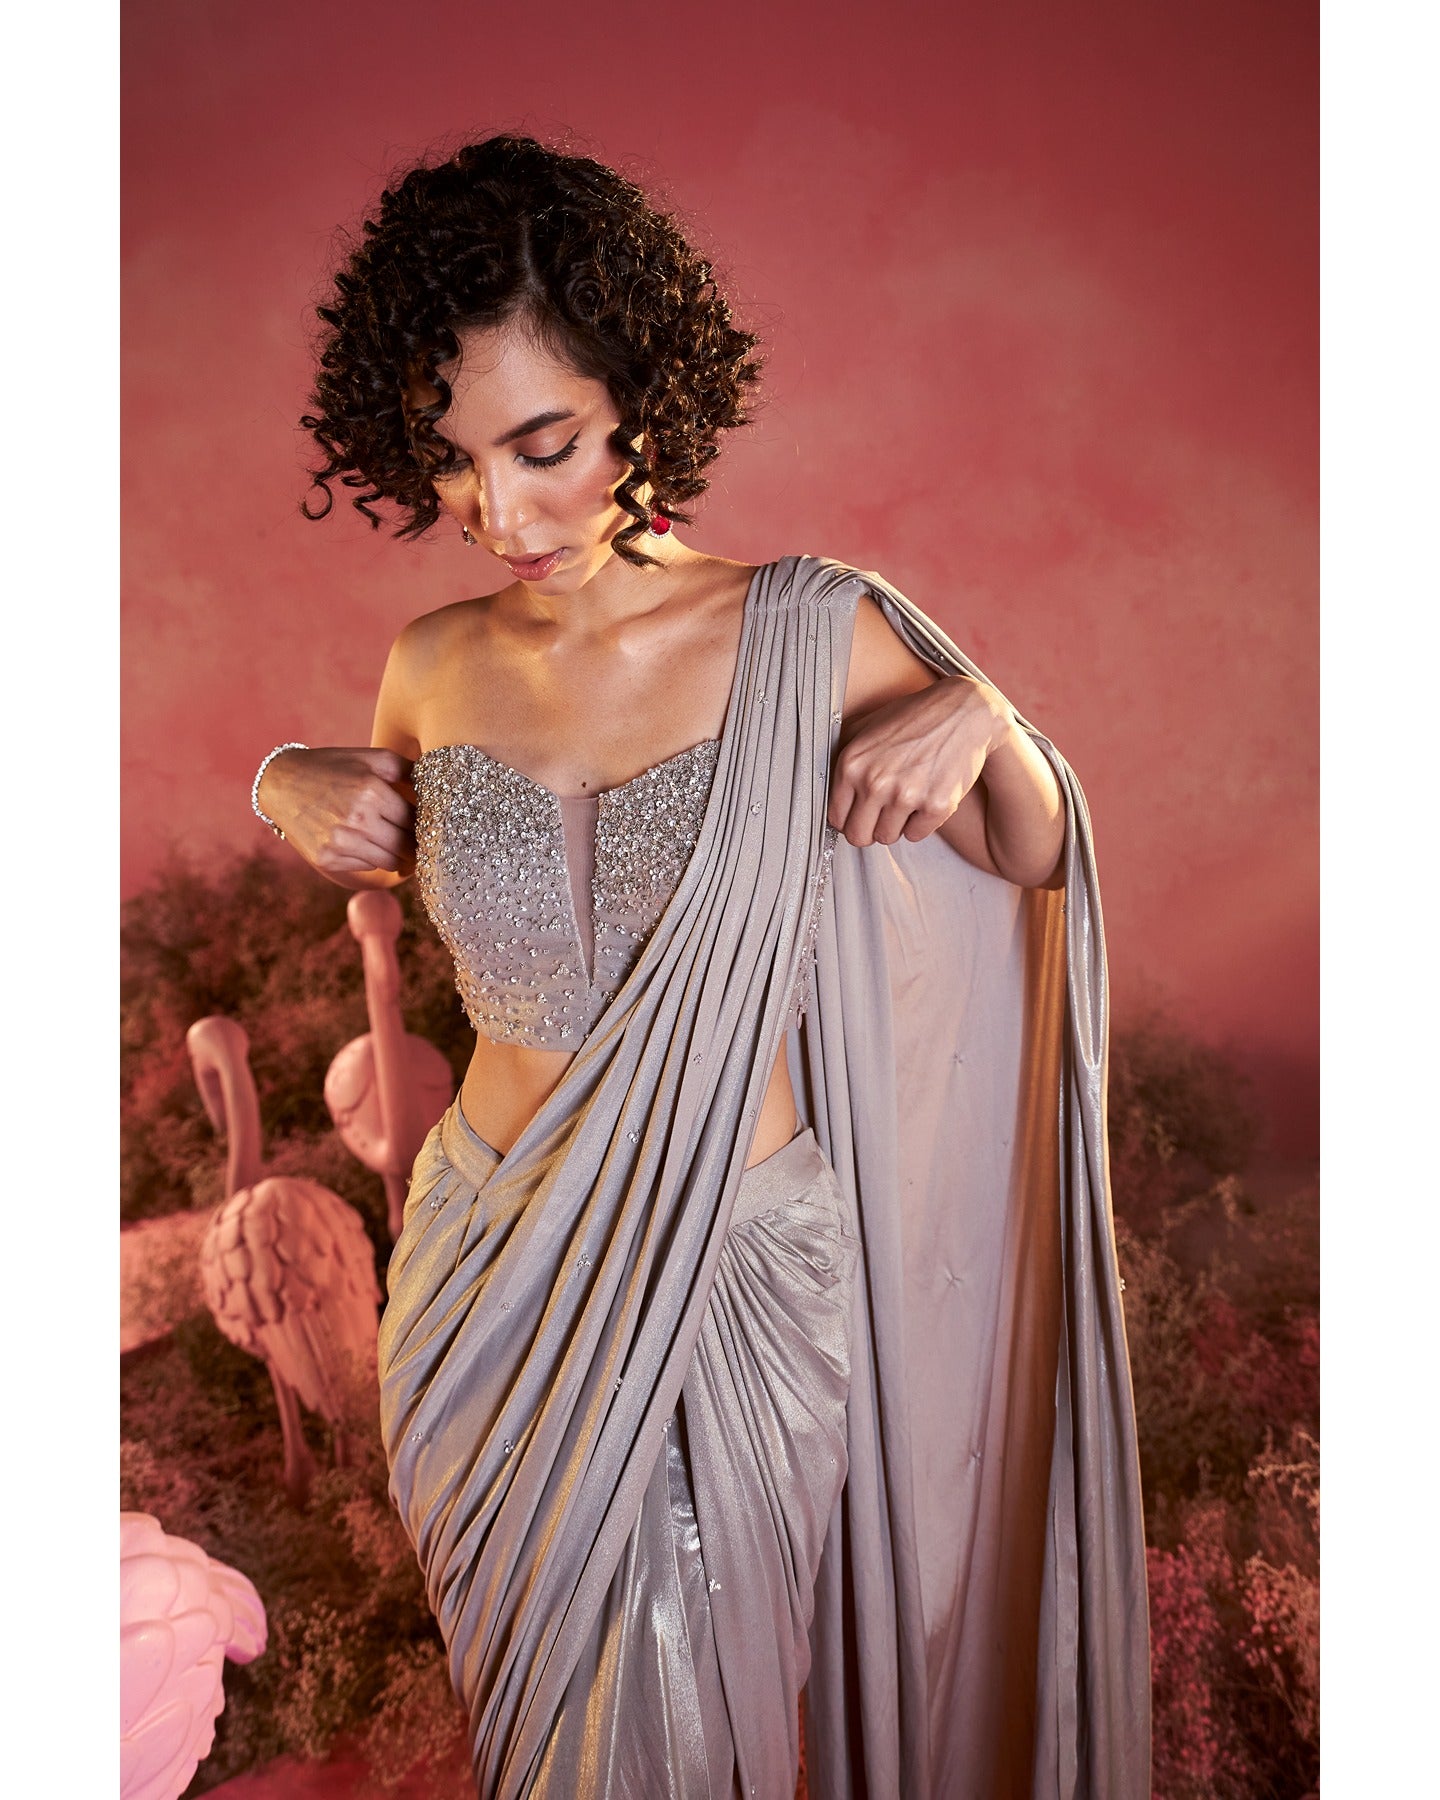 Radiant in Metallics: A mesmerizing saree set adorned with intricate hand-embroidery, where modern glamour meets traditional craftsmanship.